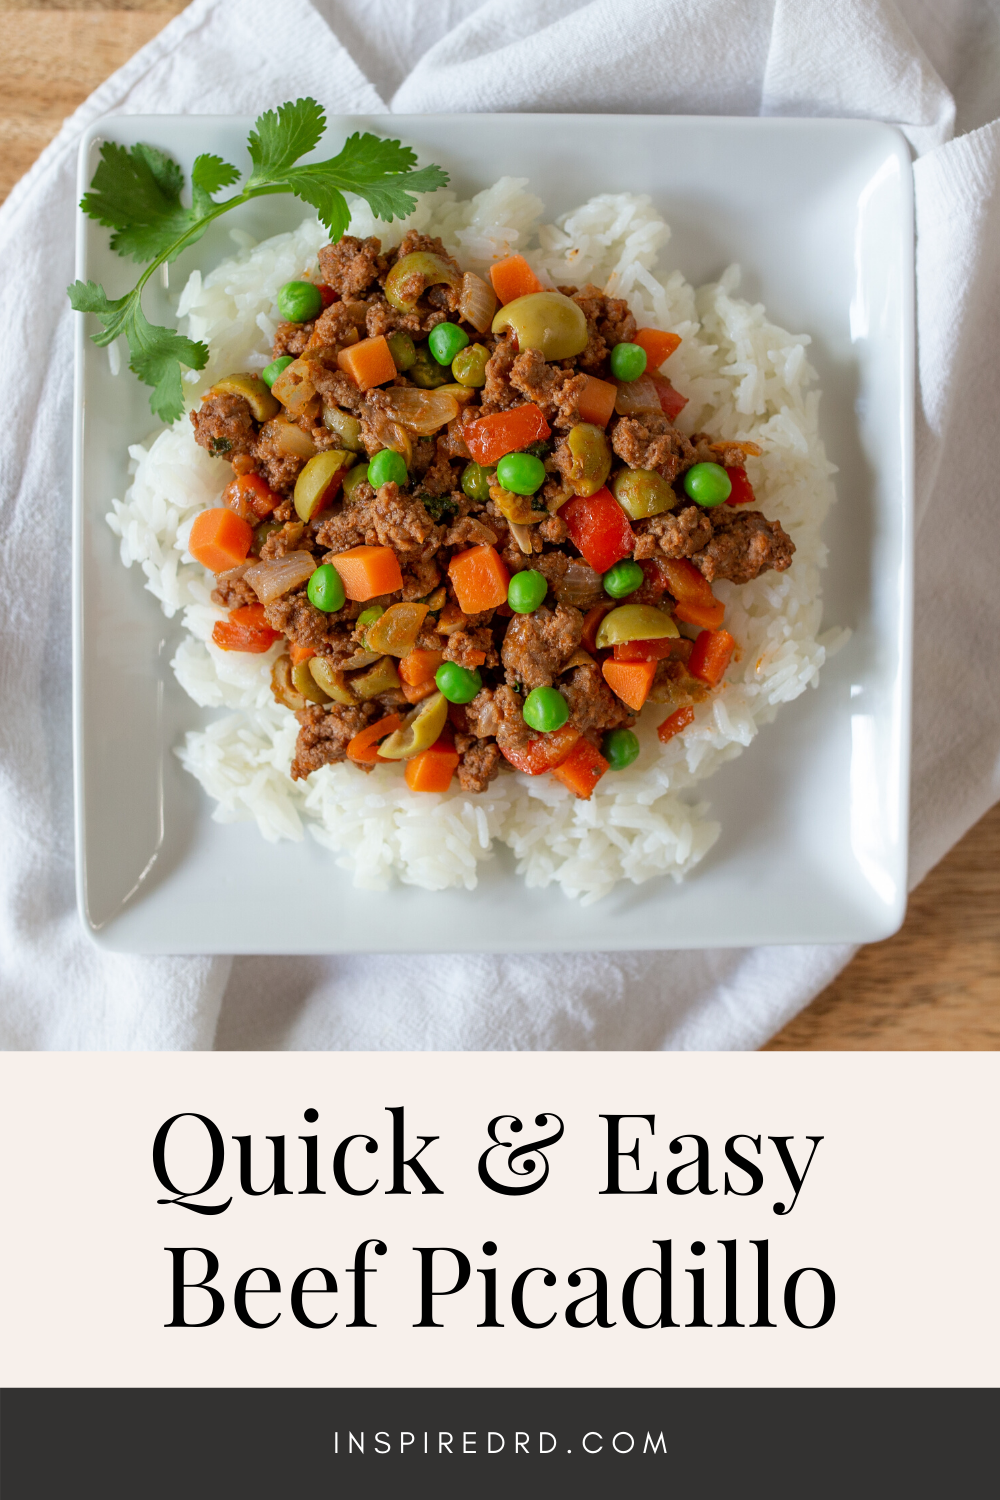 This beef picadillo recipe is quick, easy and gluten free!